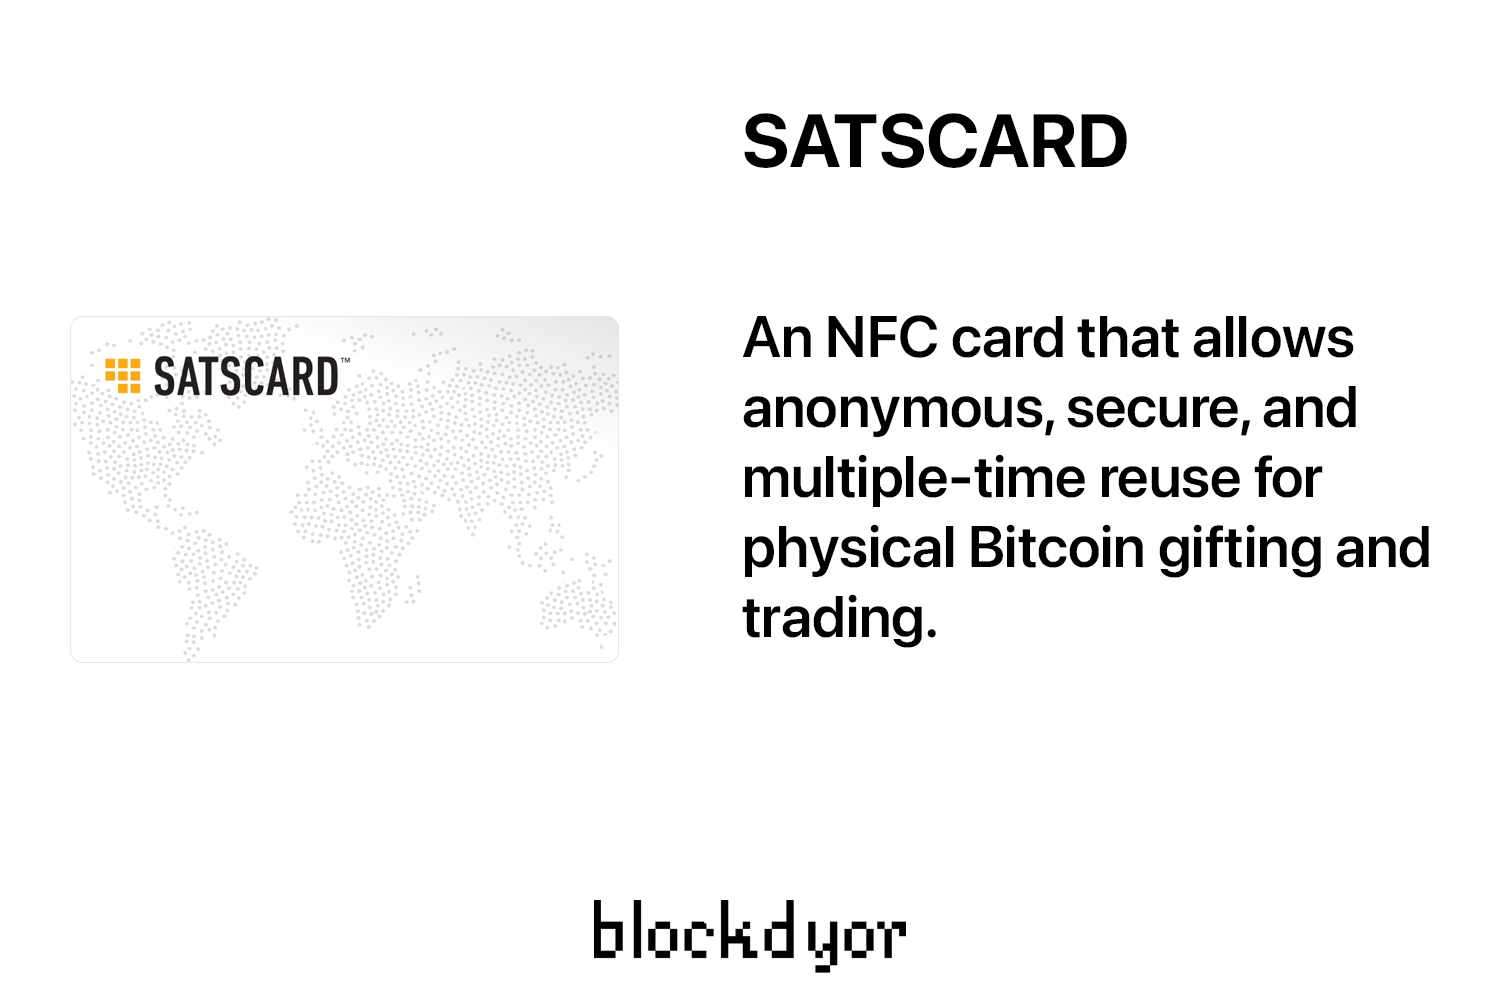 SATSCARD Overview